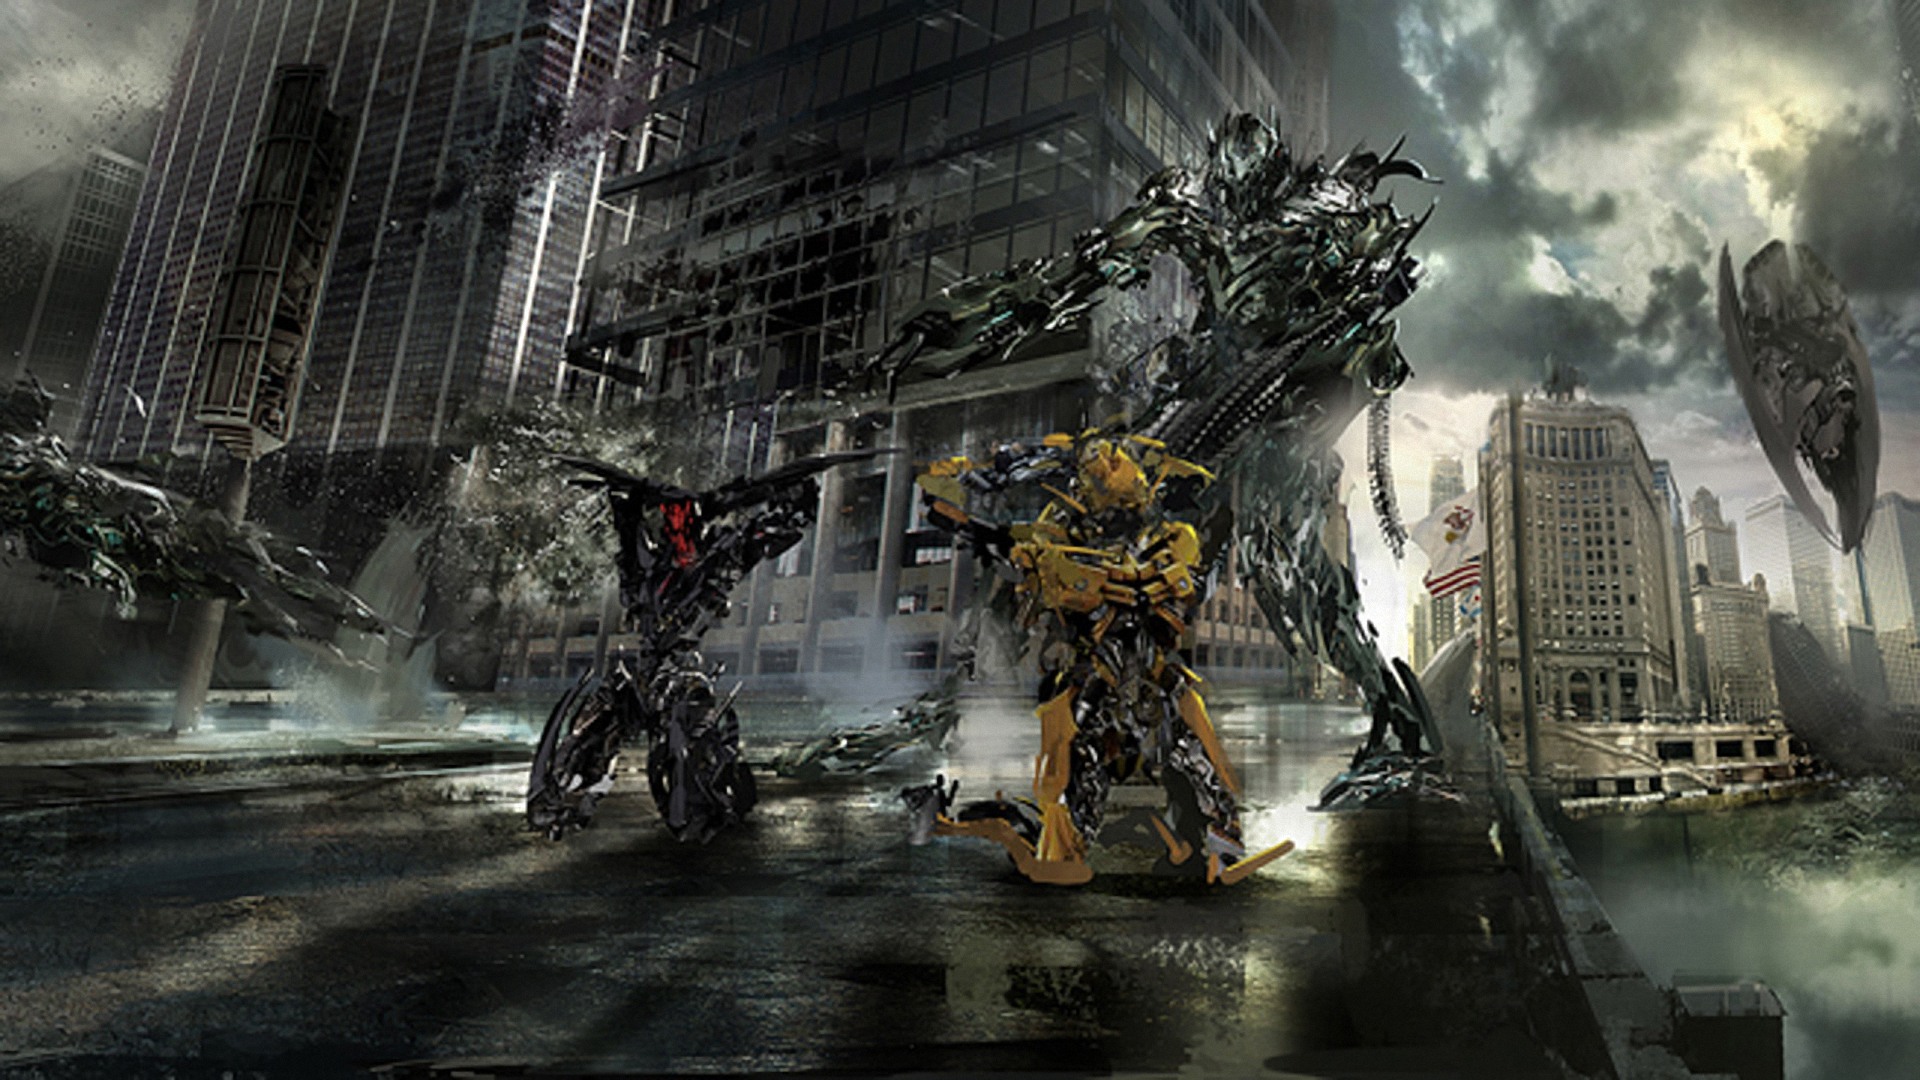 transformers hd wallpapers,action adventure game,pc game,shooter game,games,digital compositing